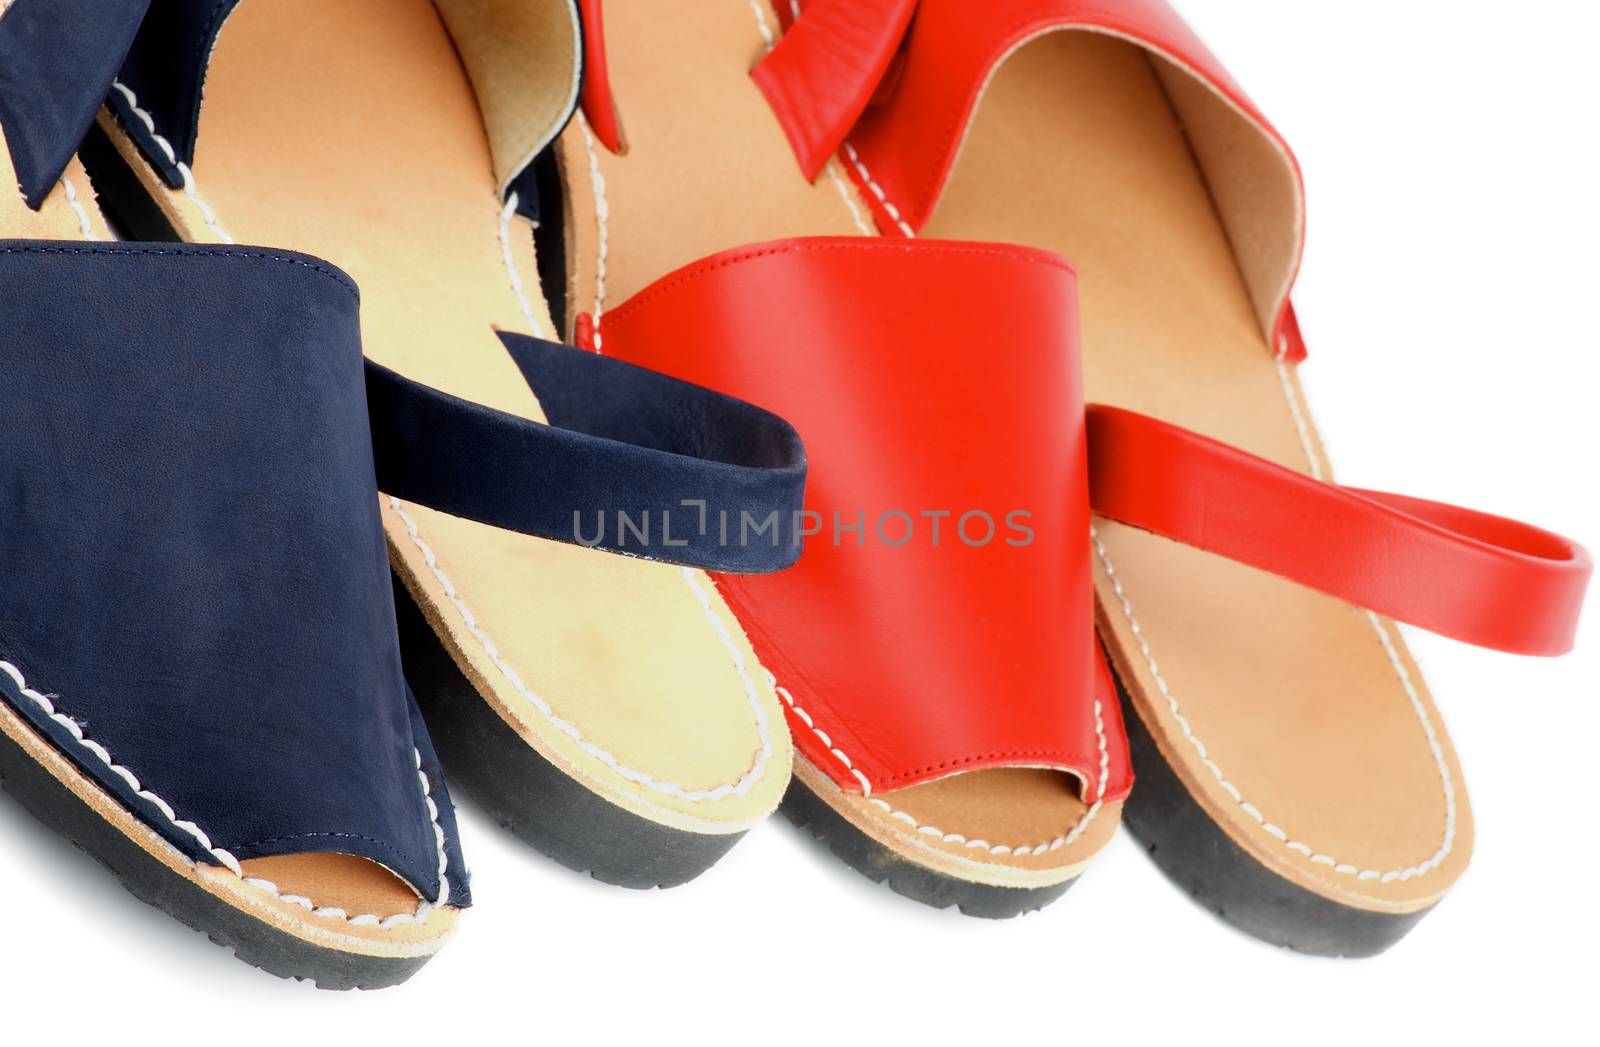 Border of Red and Blue Leather Summer Sandals isolated on white background